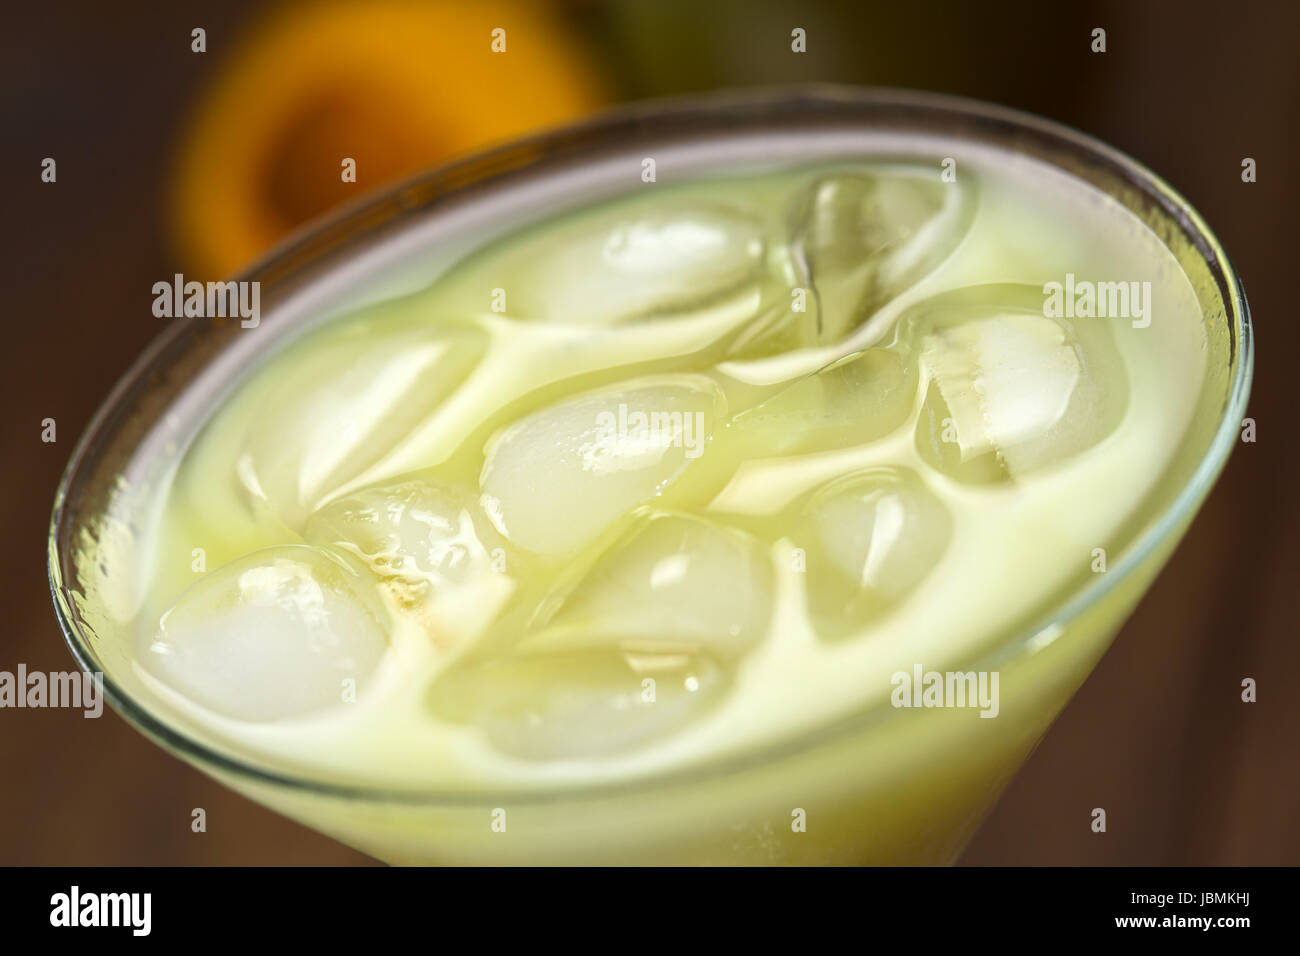 Peruvian cream liqueur made of lucuma fruit served in cocktail glass with ice cubes (Selective Focus, Focus in the middle of the ice cubes) Stock Photo